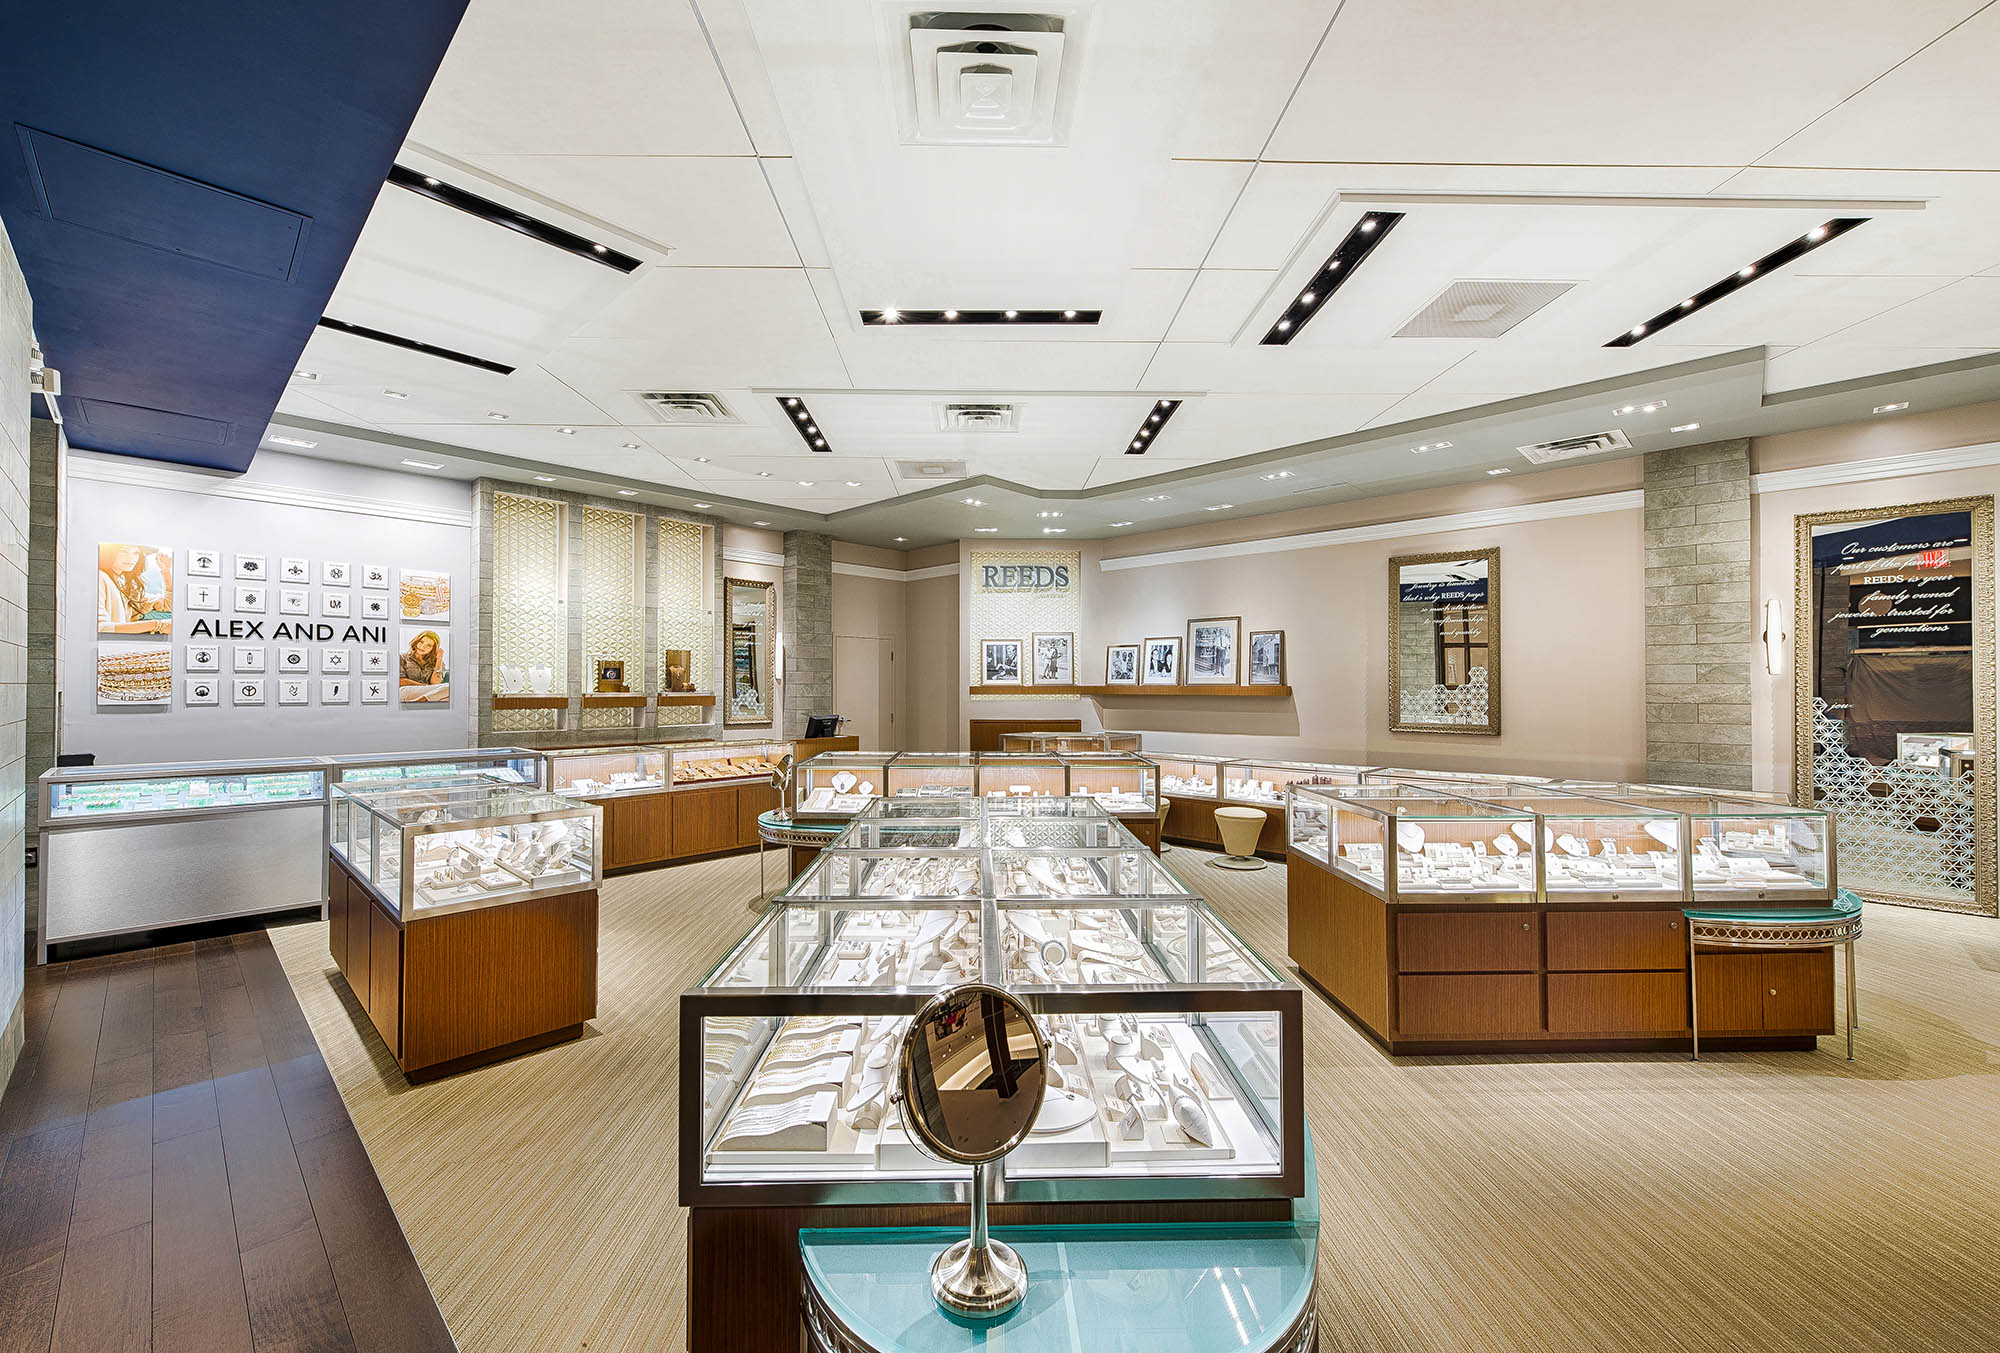 Reeds Jewelers - starrdesign | Charlotte NC. Architectural and Design Firm